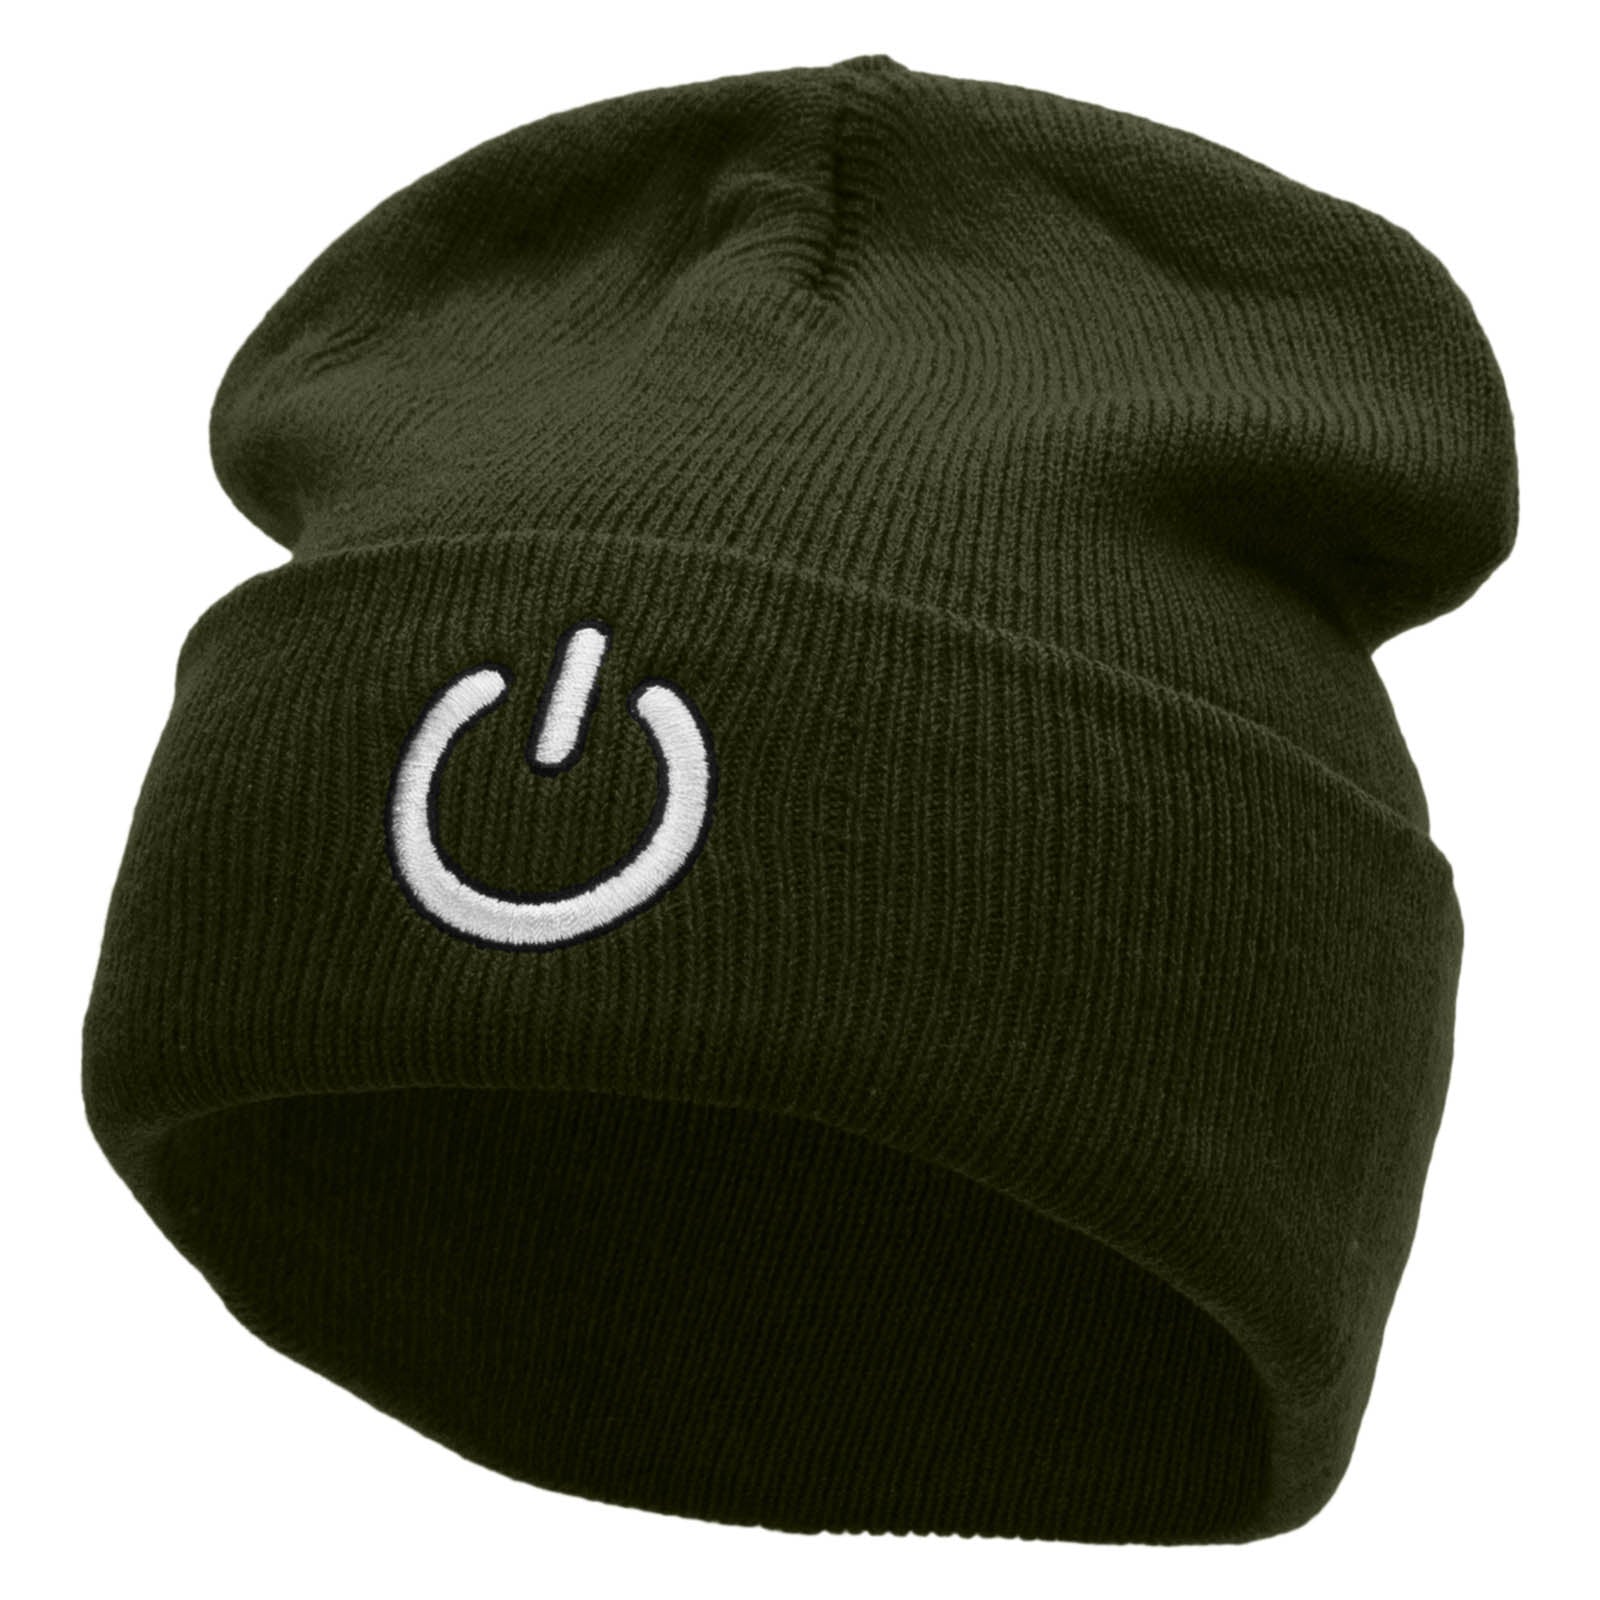 Power Button Embroidered 12 Inch Long Knitted Beanie - Olive OSFM